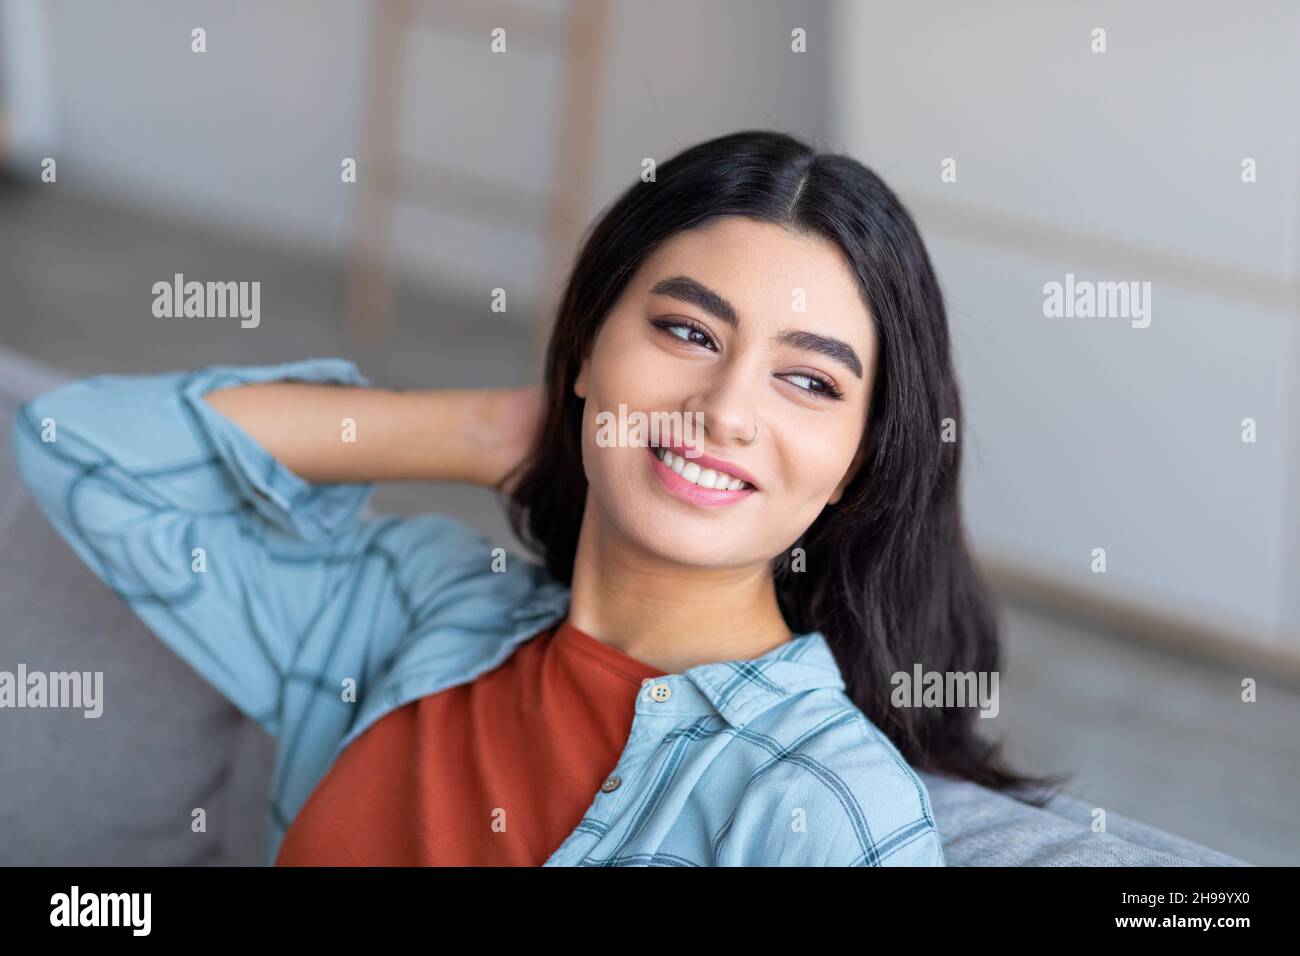 Happy Arab woman leaning back on sofa, resting on comfy couch, holding one hand behind her head, enjoying relaxing day Stock Photo